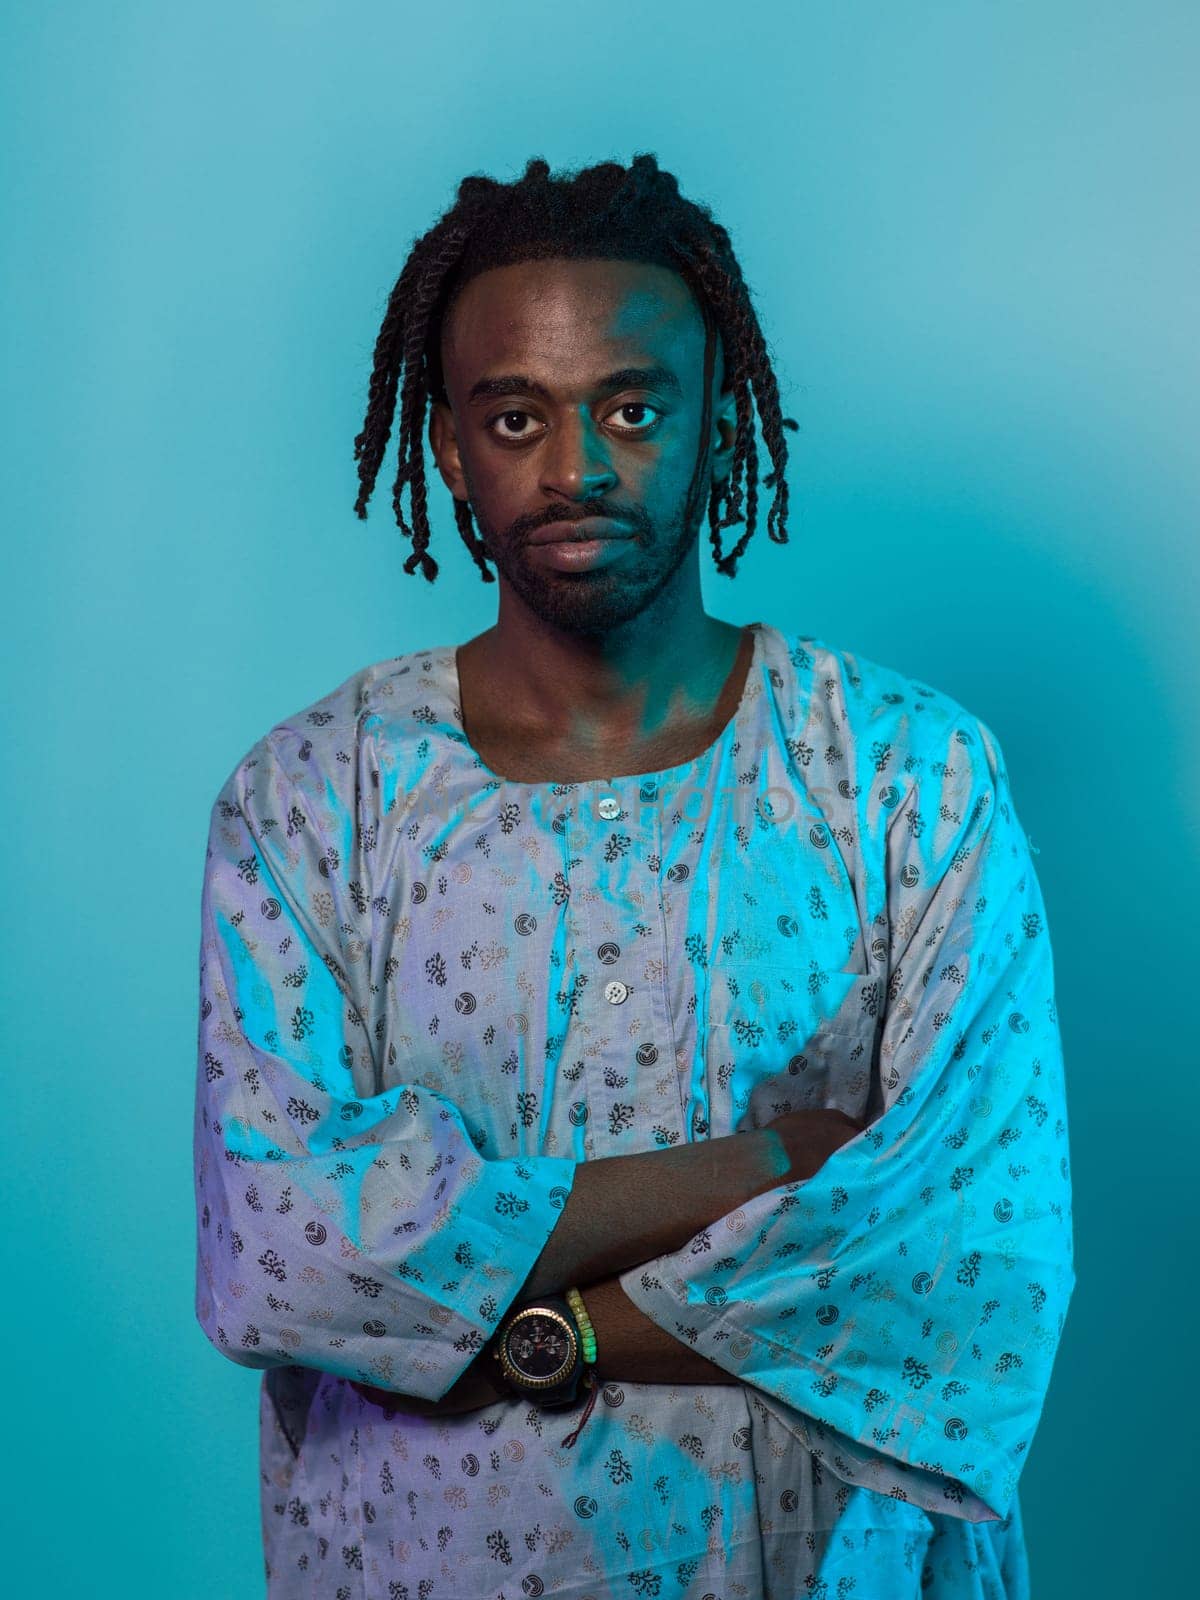 A Sudanese man adorned with modern dreadlocks stands proudly in traditional Sudanese attire, his arms crossed, conveying a blend of cultural heritage and contemporary style against a vibrant blue backdrop. by dotshock